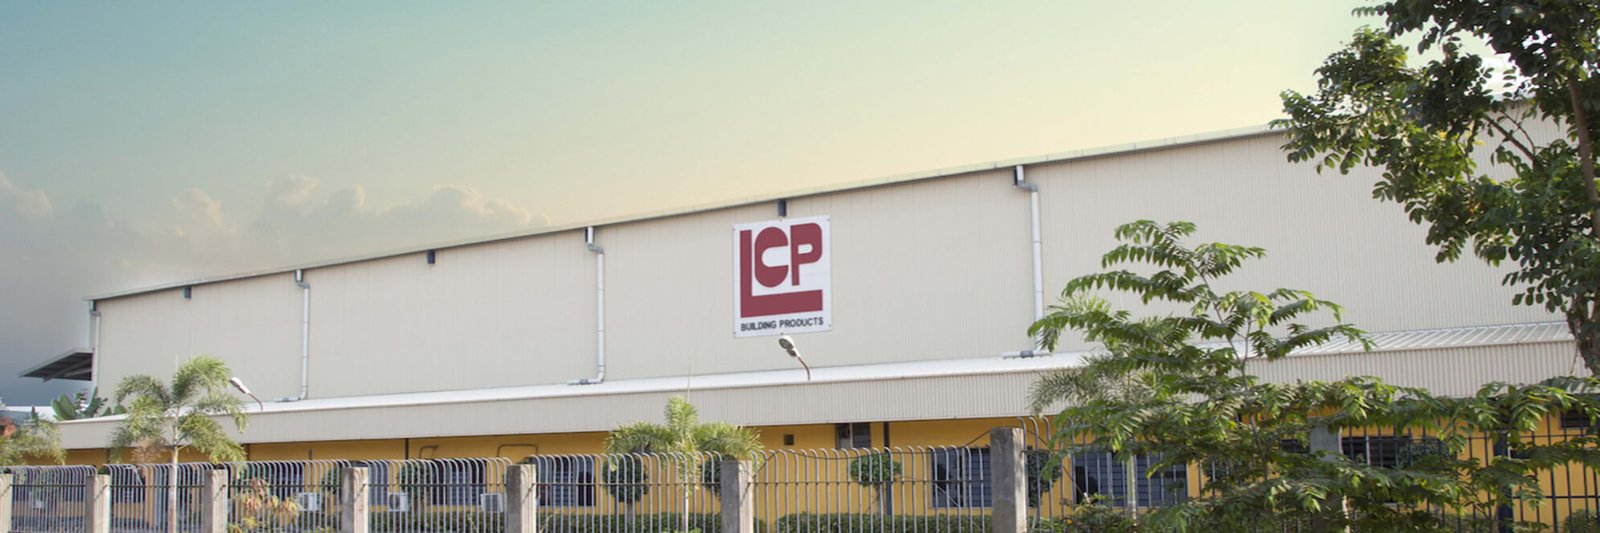 best roof sheet manufacturer in Bahrain: LCP Sliders